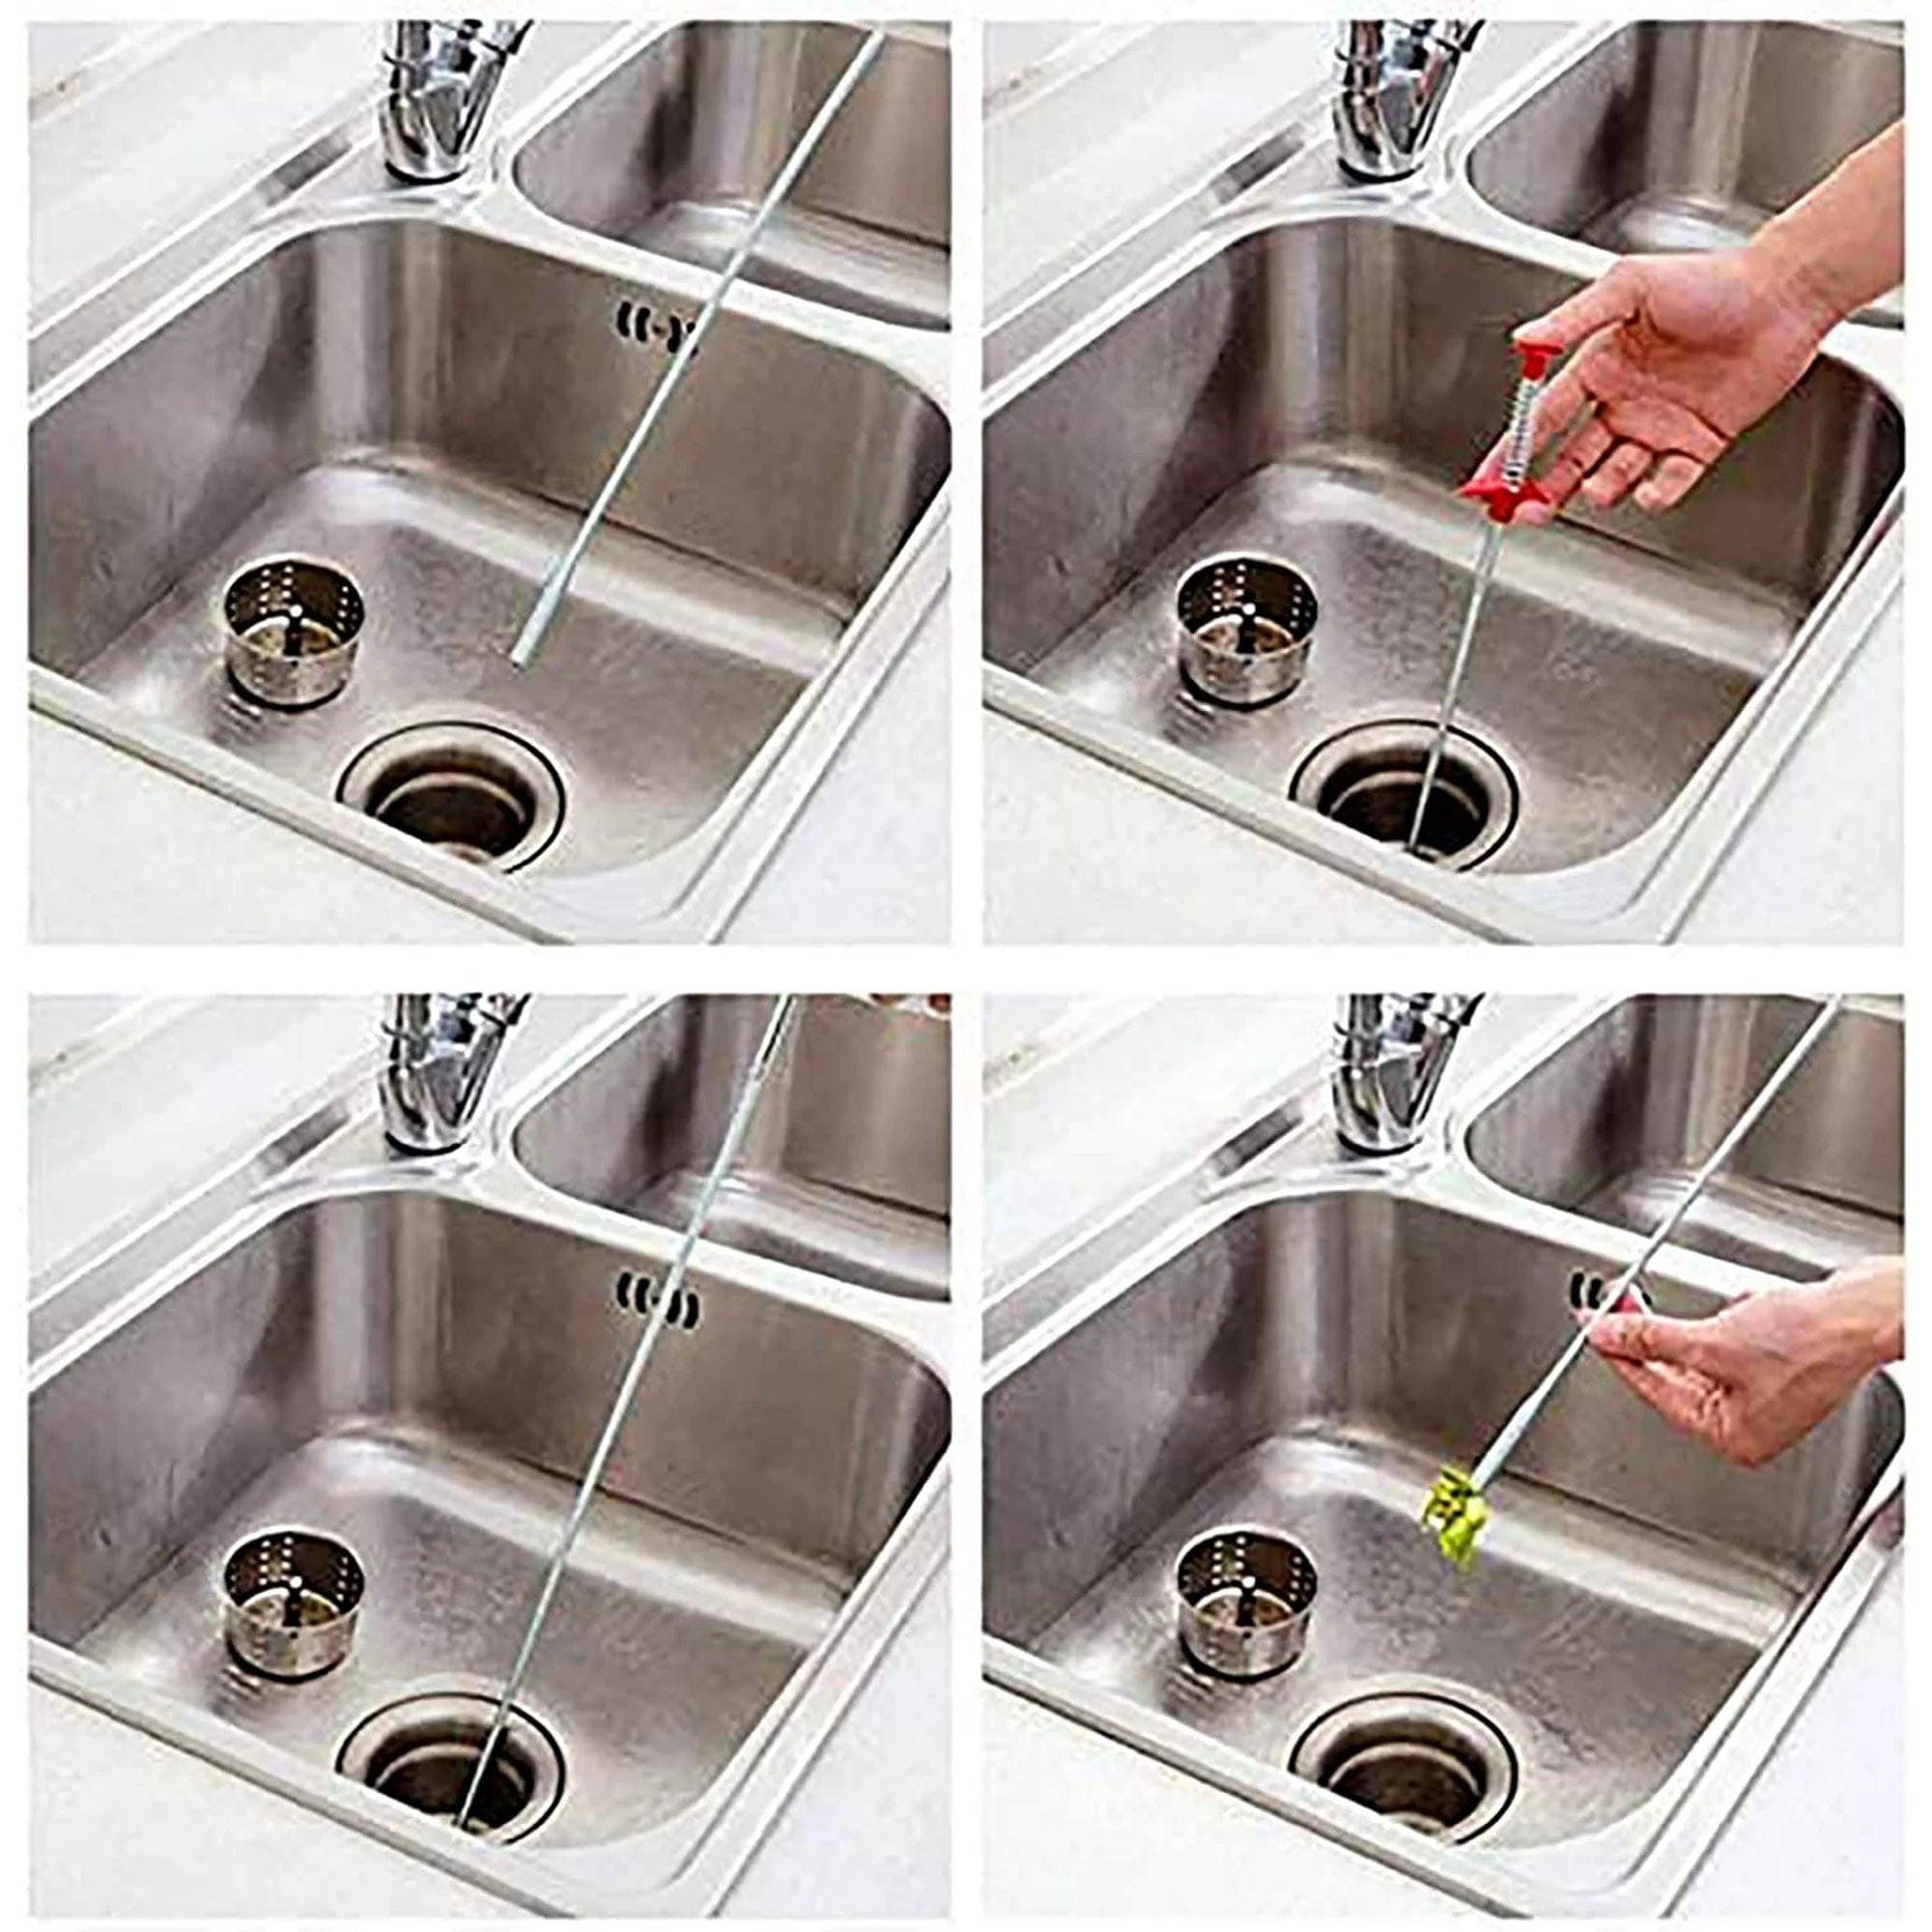 Sewer cleaning hook & No Need For Chemicals Zaavio®